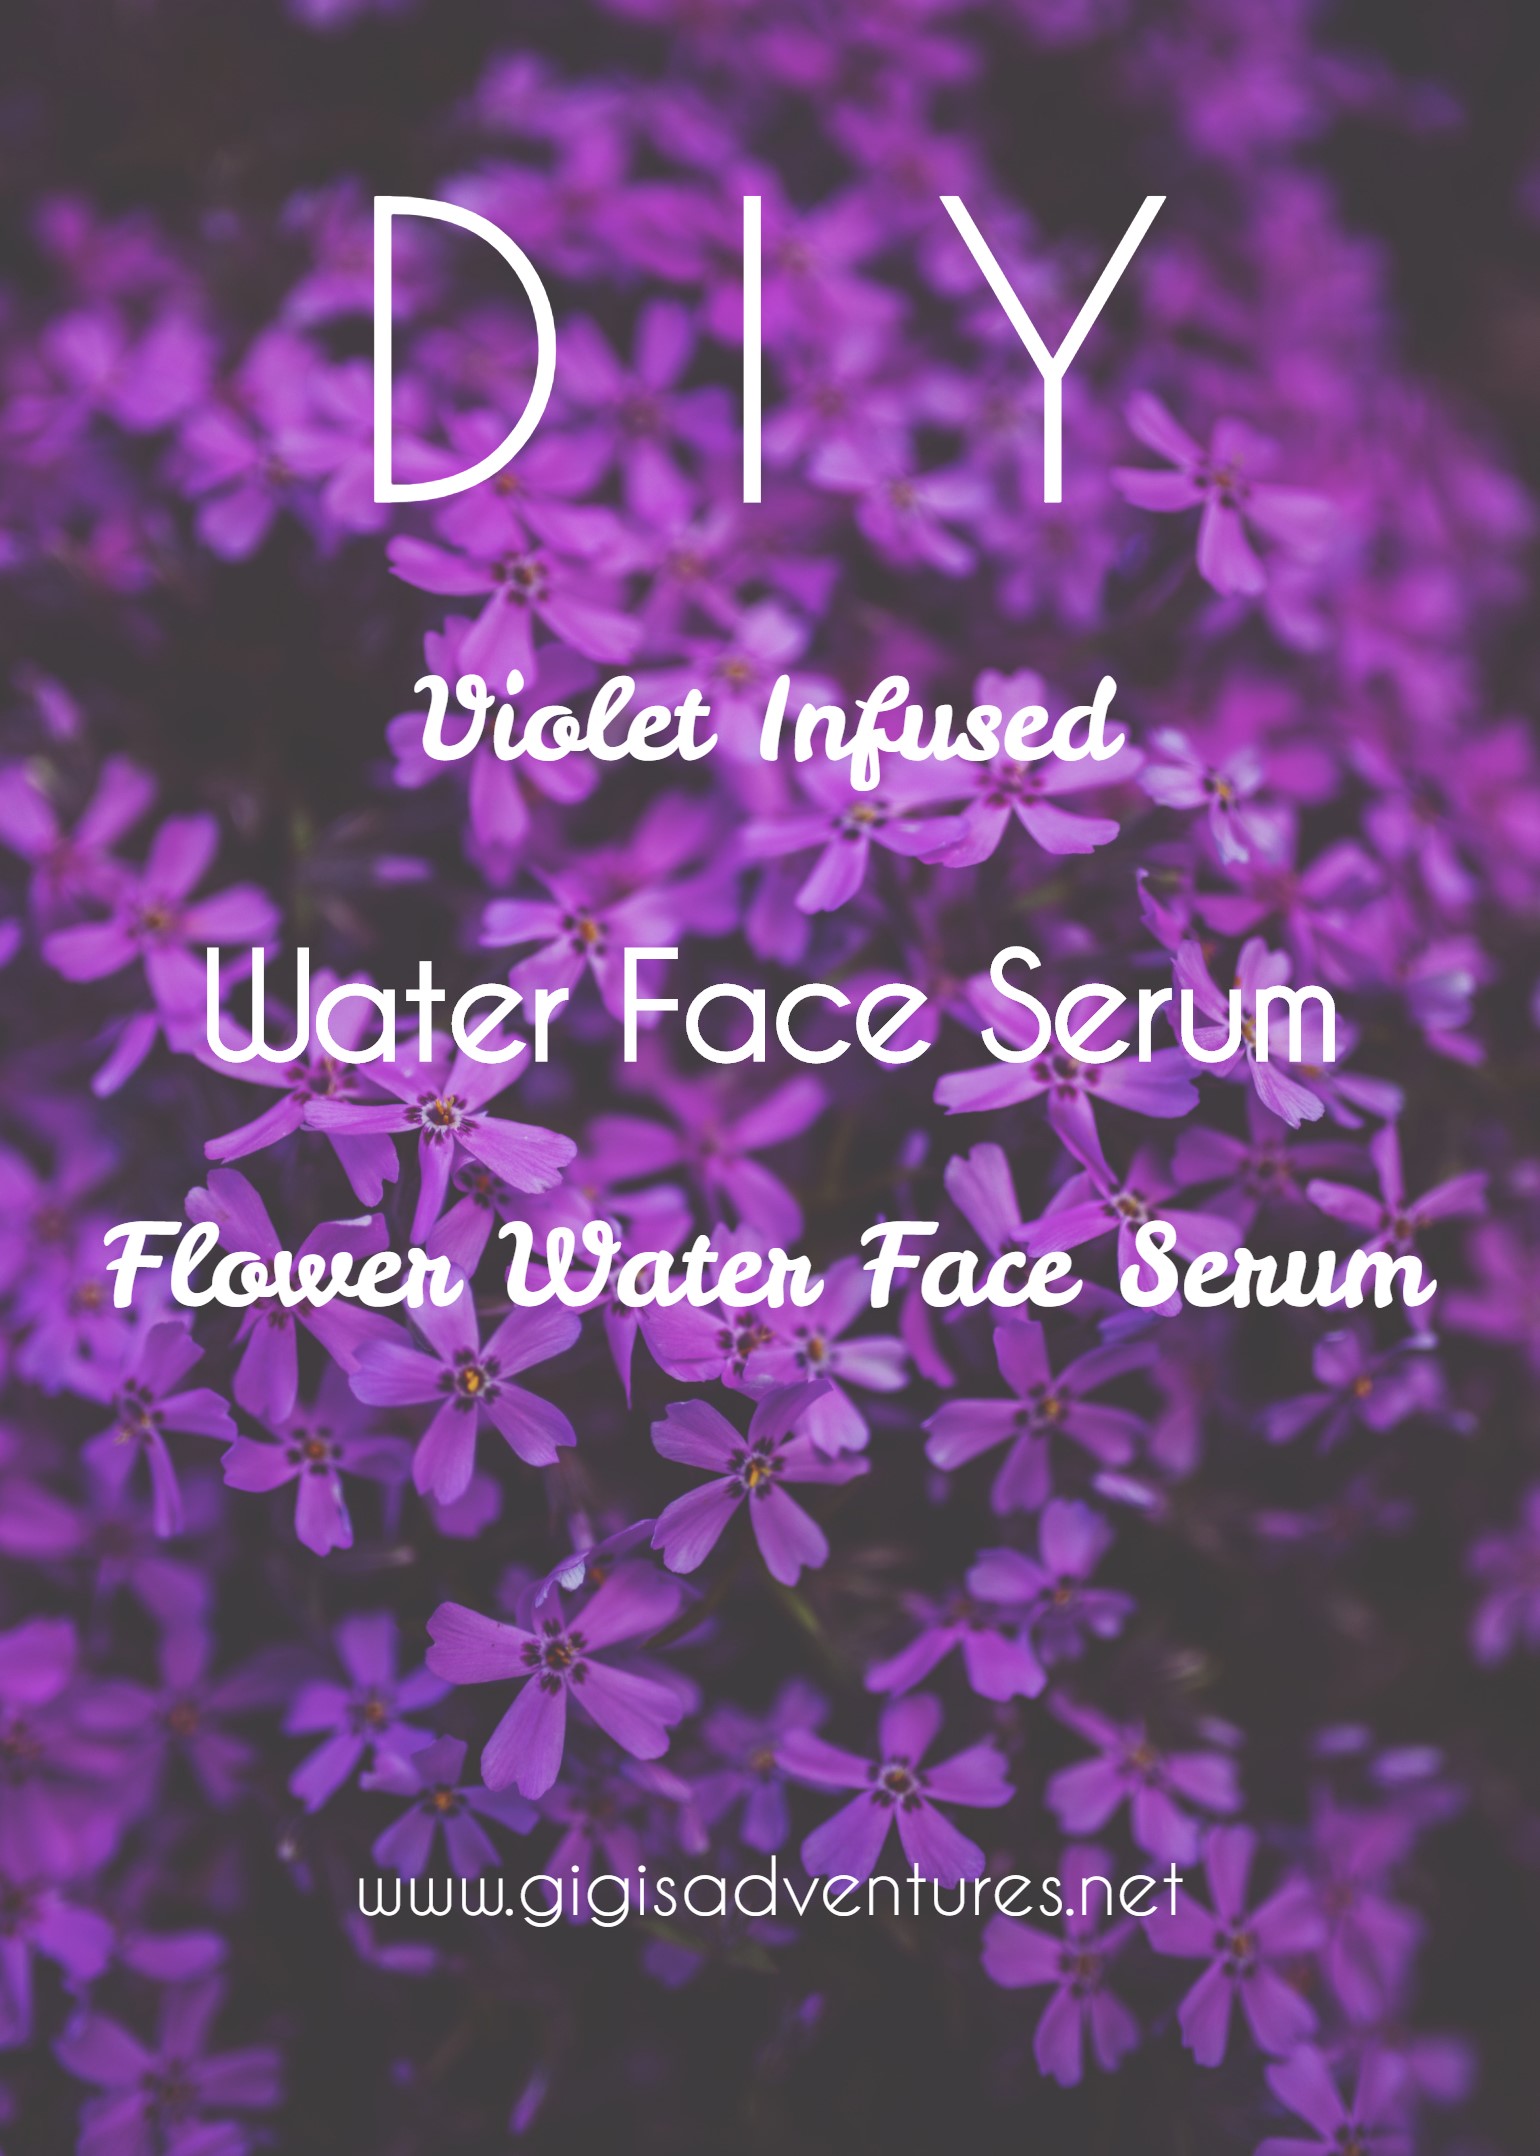 Enrich your skincare routine with this aesthetically pleasing and tumblr inspired Violet Infused Water Face Serum, perfect for dry and acne-prone skin!